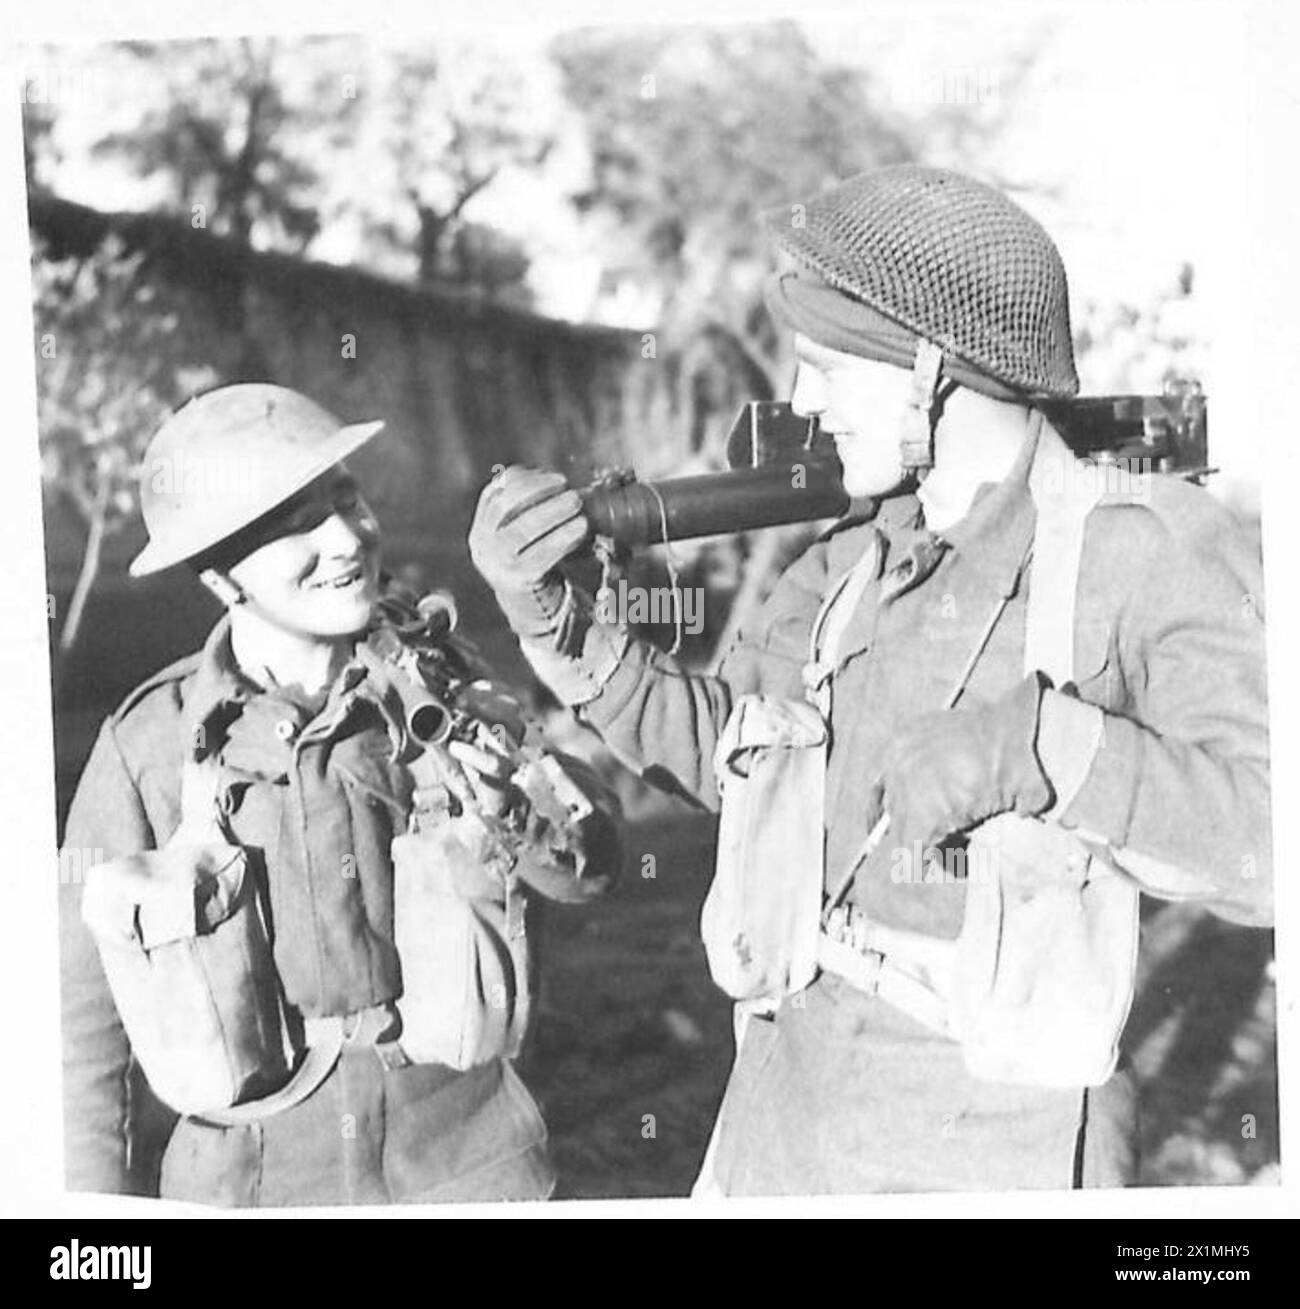 FIFTH ARMY - BRITISH SECTION - Rfn. F. Mugford of Bedford with mortar and Rfn. A. Higson, New Malden, Surrey, with Bren gun, ready for patrol, British Army Stock Photo